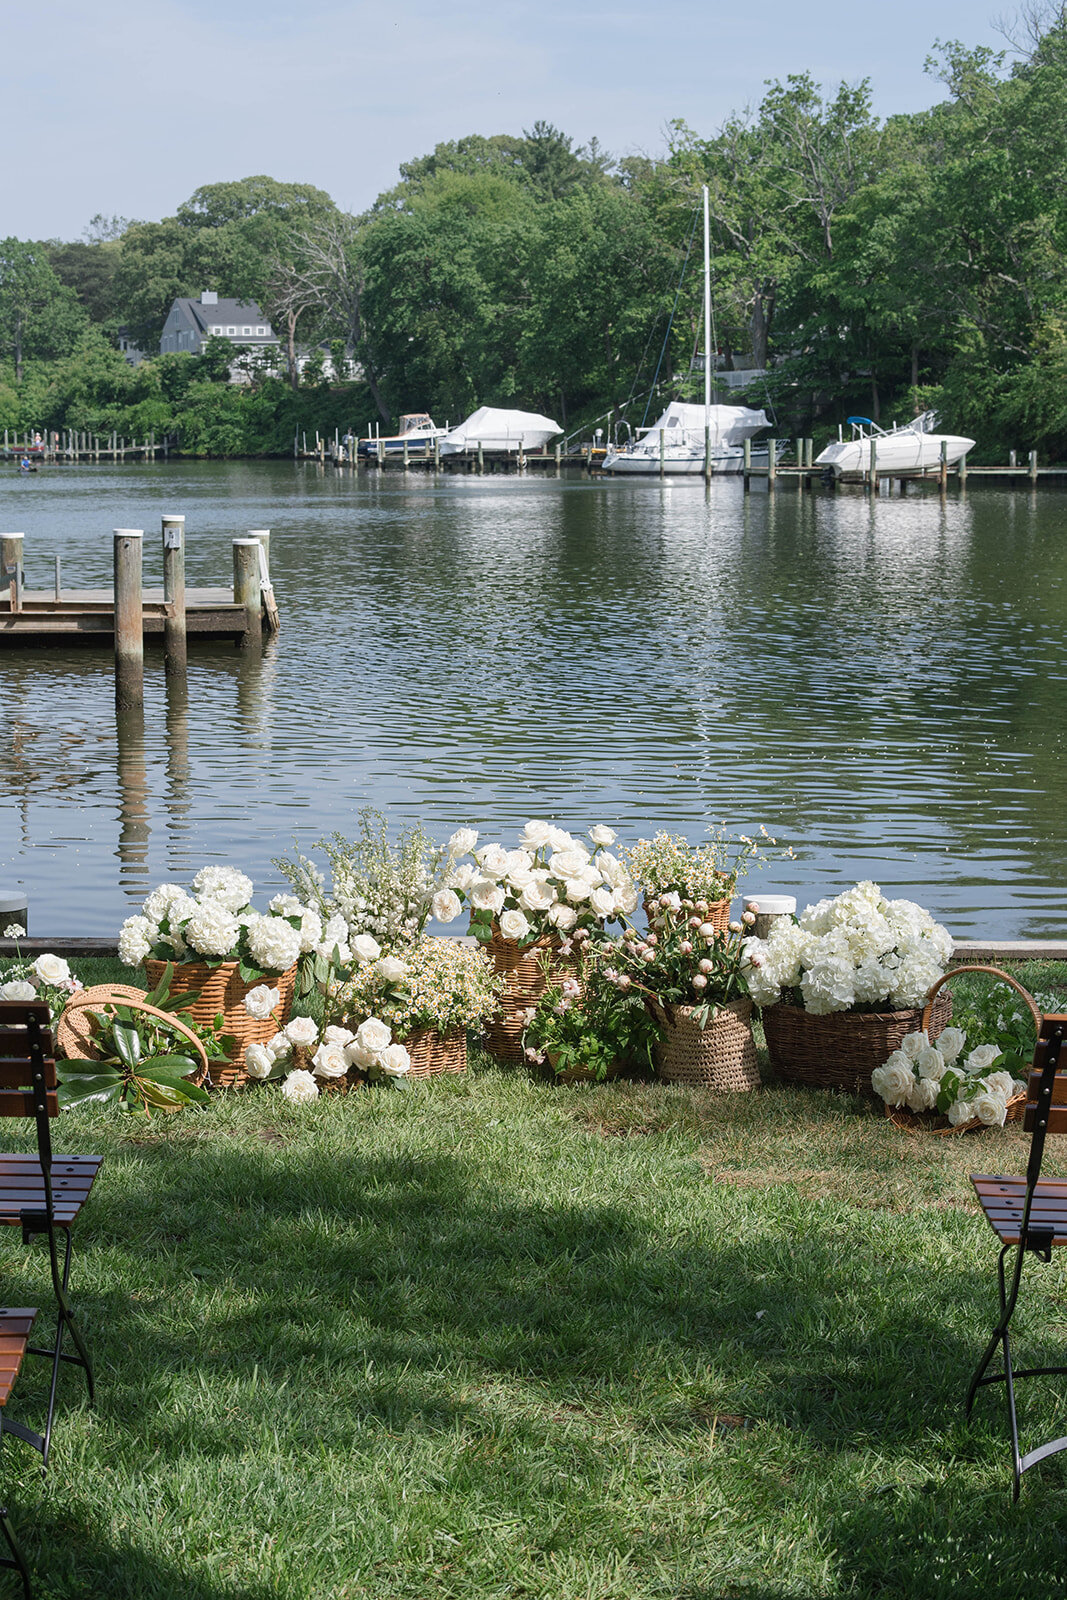 Ceremony display of assorted wicker baskets filled with white flowers including hydrangea, white garden roses, and tulips in front of a waterfront backdrop.